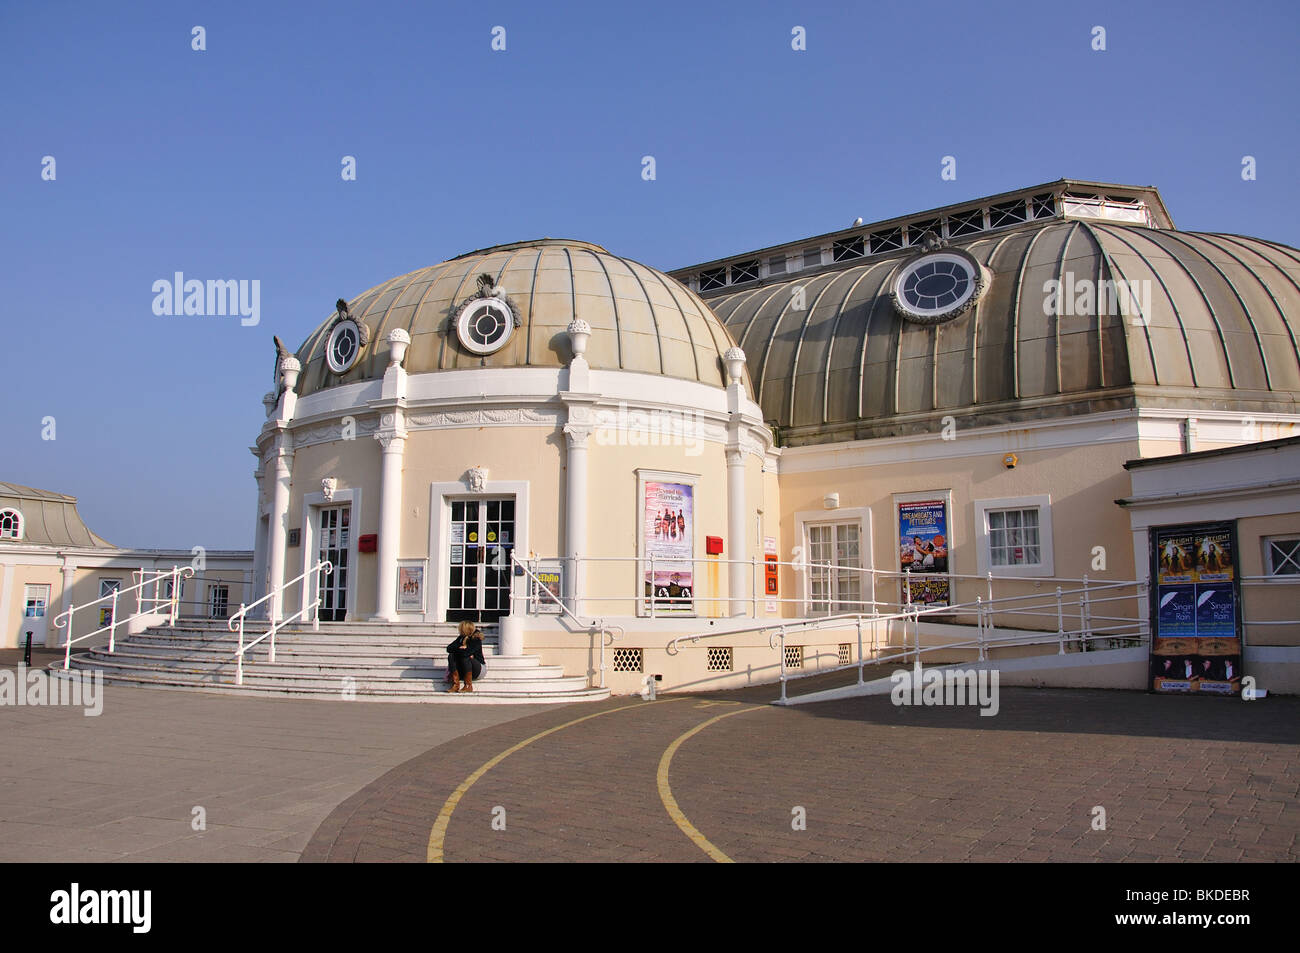 Pavilion Theatre, Worthing Pier, Worthing, West Sussex, in Inghilterra, Regno Unito Foto Stock